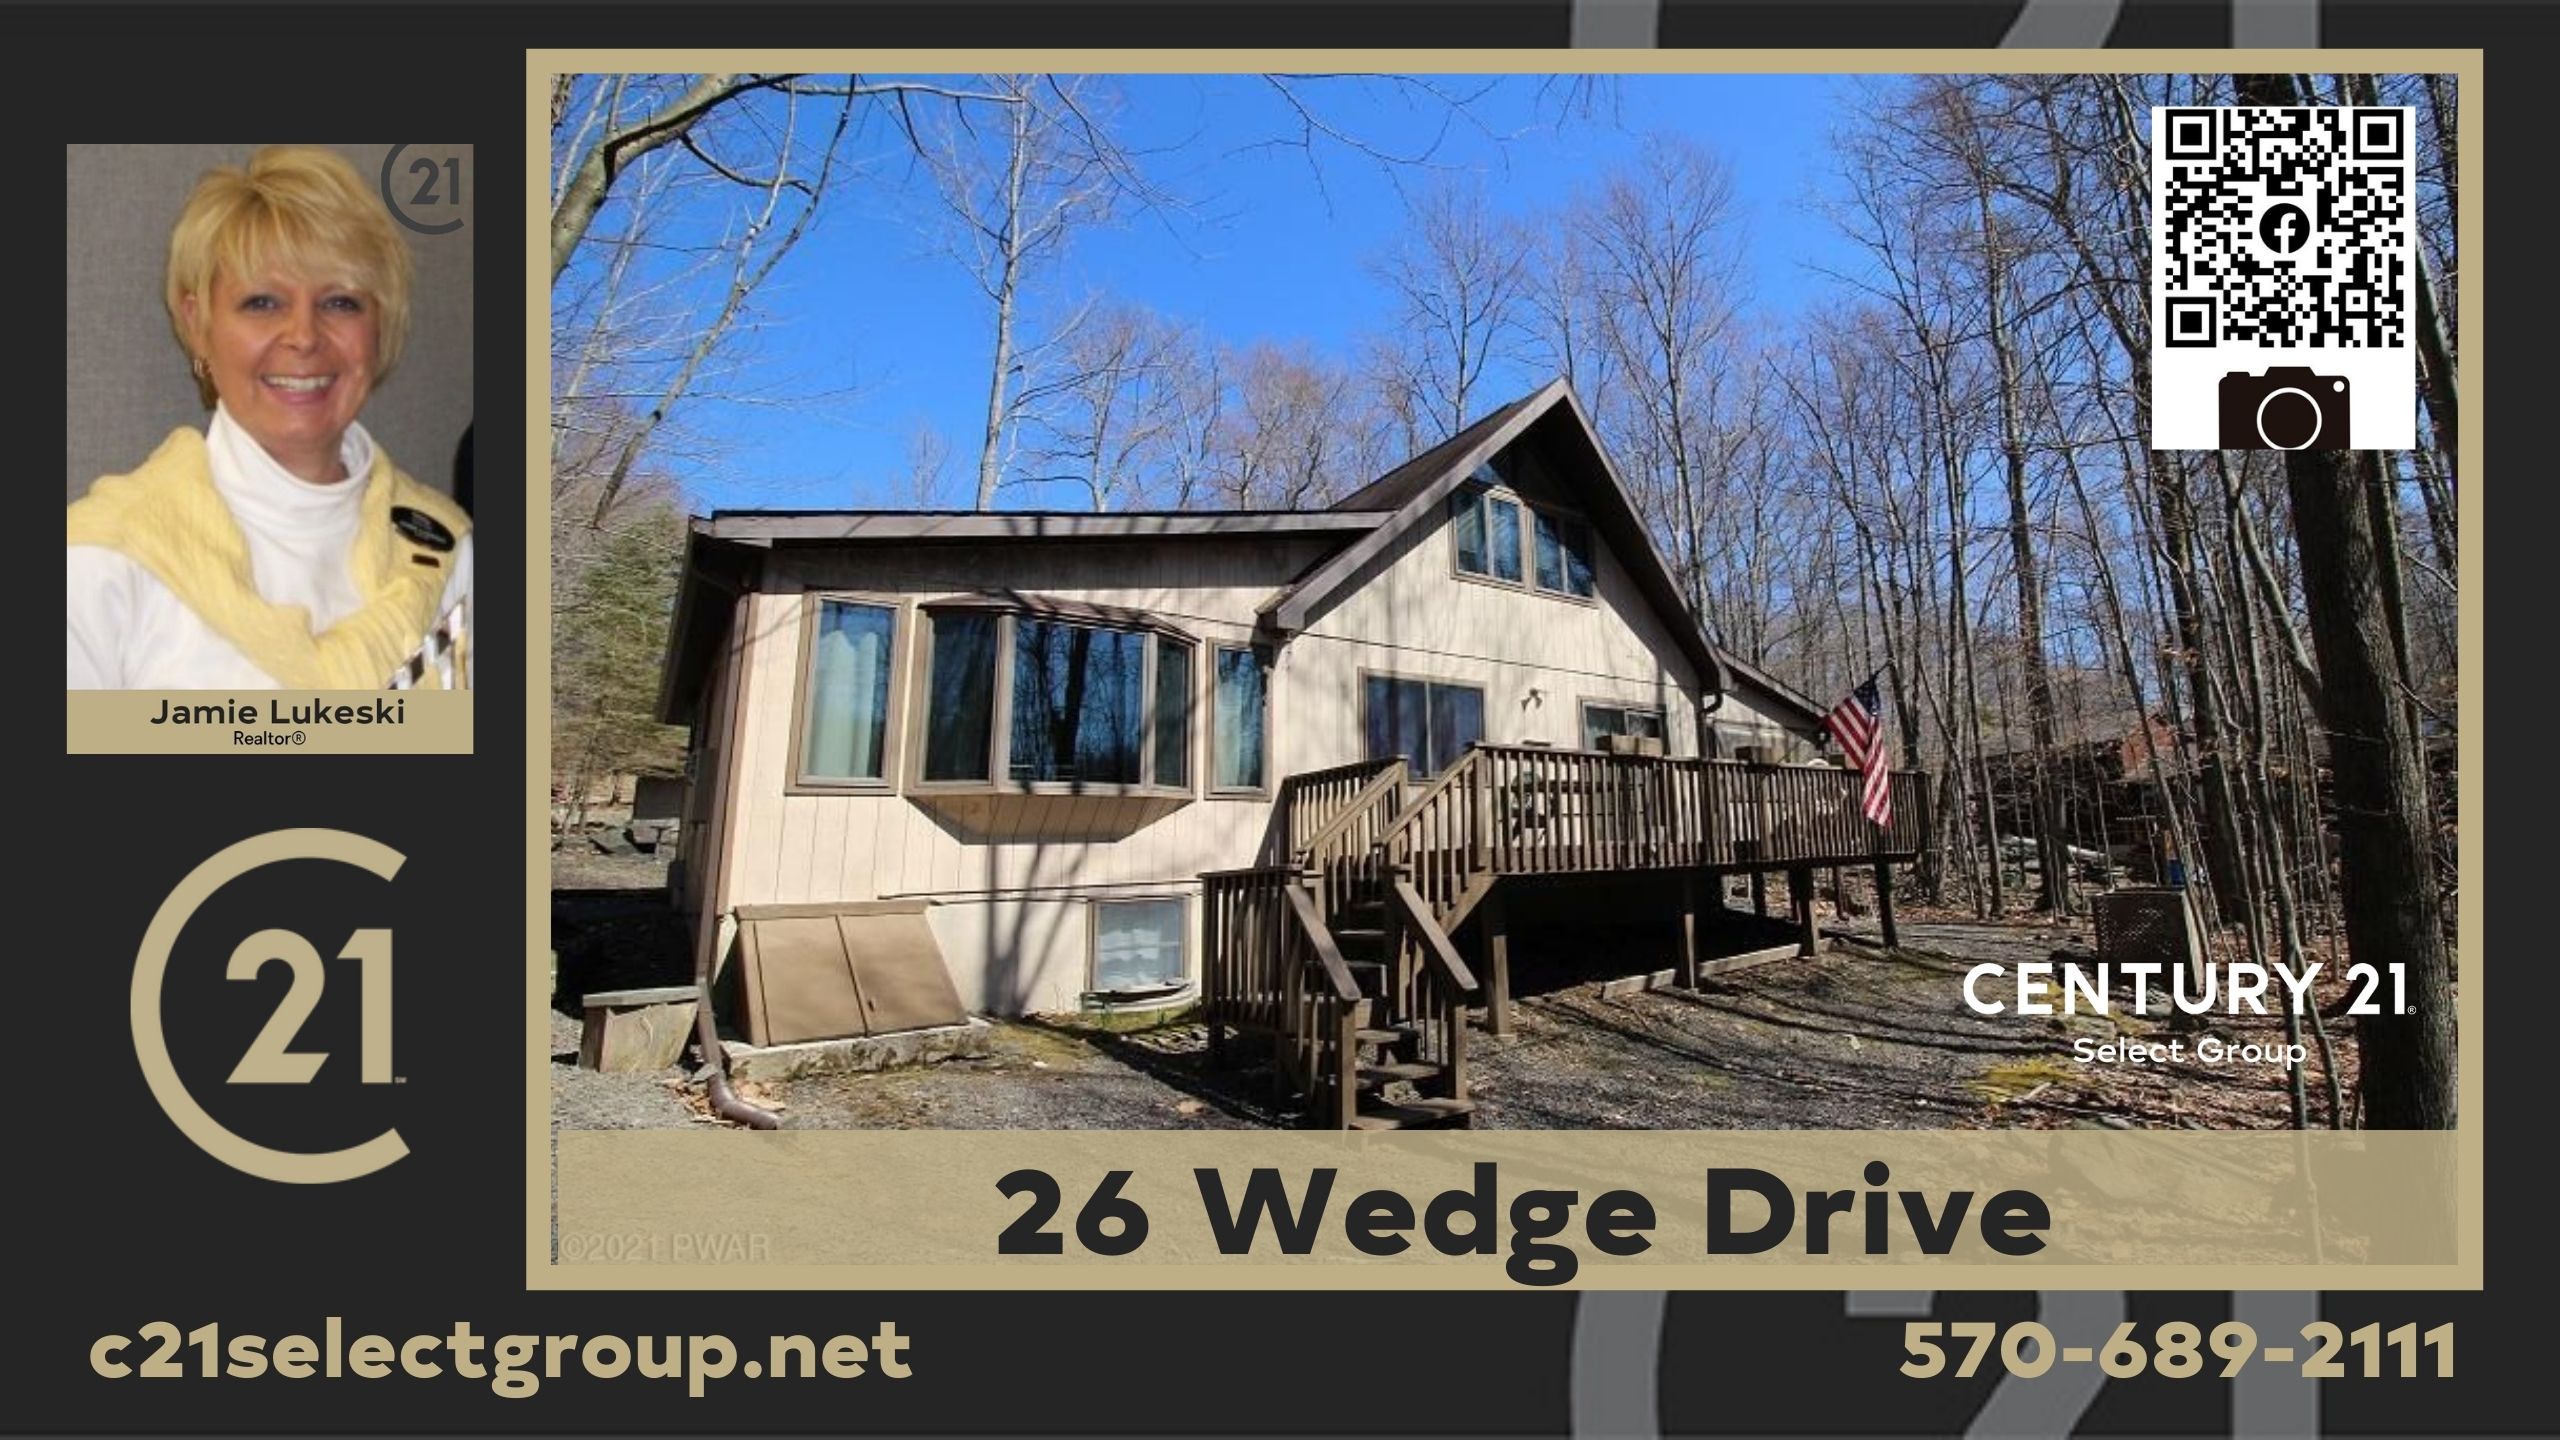 2965 Wedge Drive: Golf Course Chalet in The Hideout